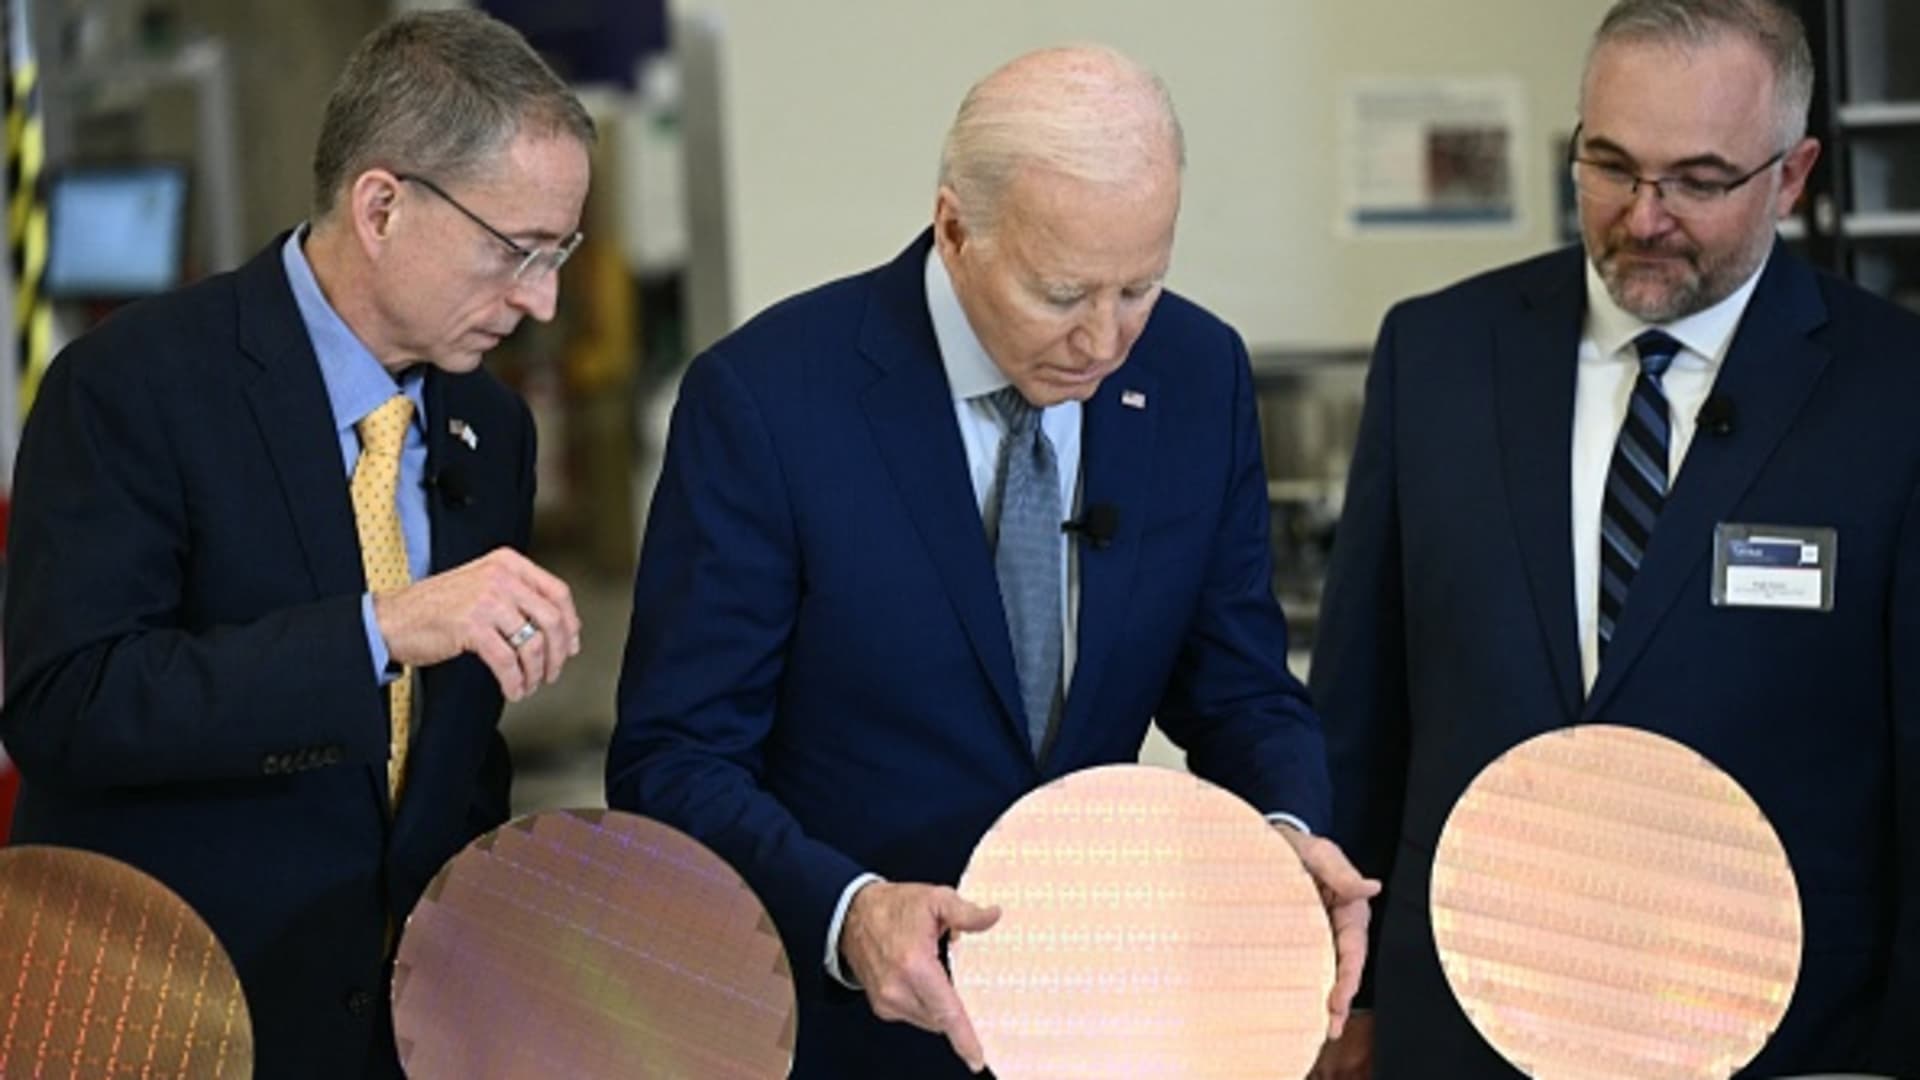 US President Joe Biden (C) stands behind a table, next to Intel's CEO Pat Gelsinger (L) as they look at wafers while touring the Intel Ocotillo Campus in Chandler, Arizona, on March 20, 2024.